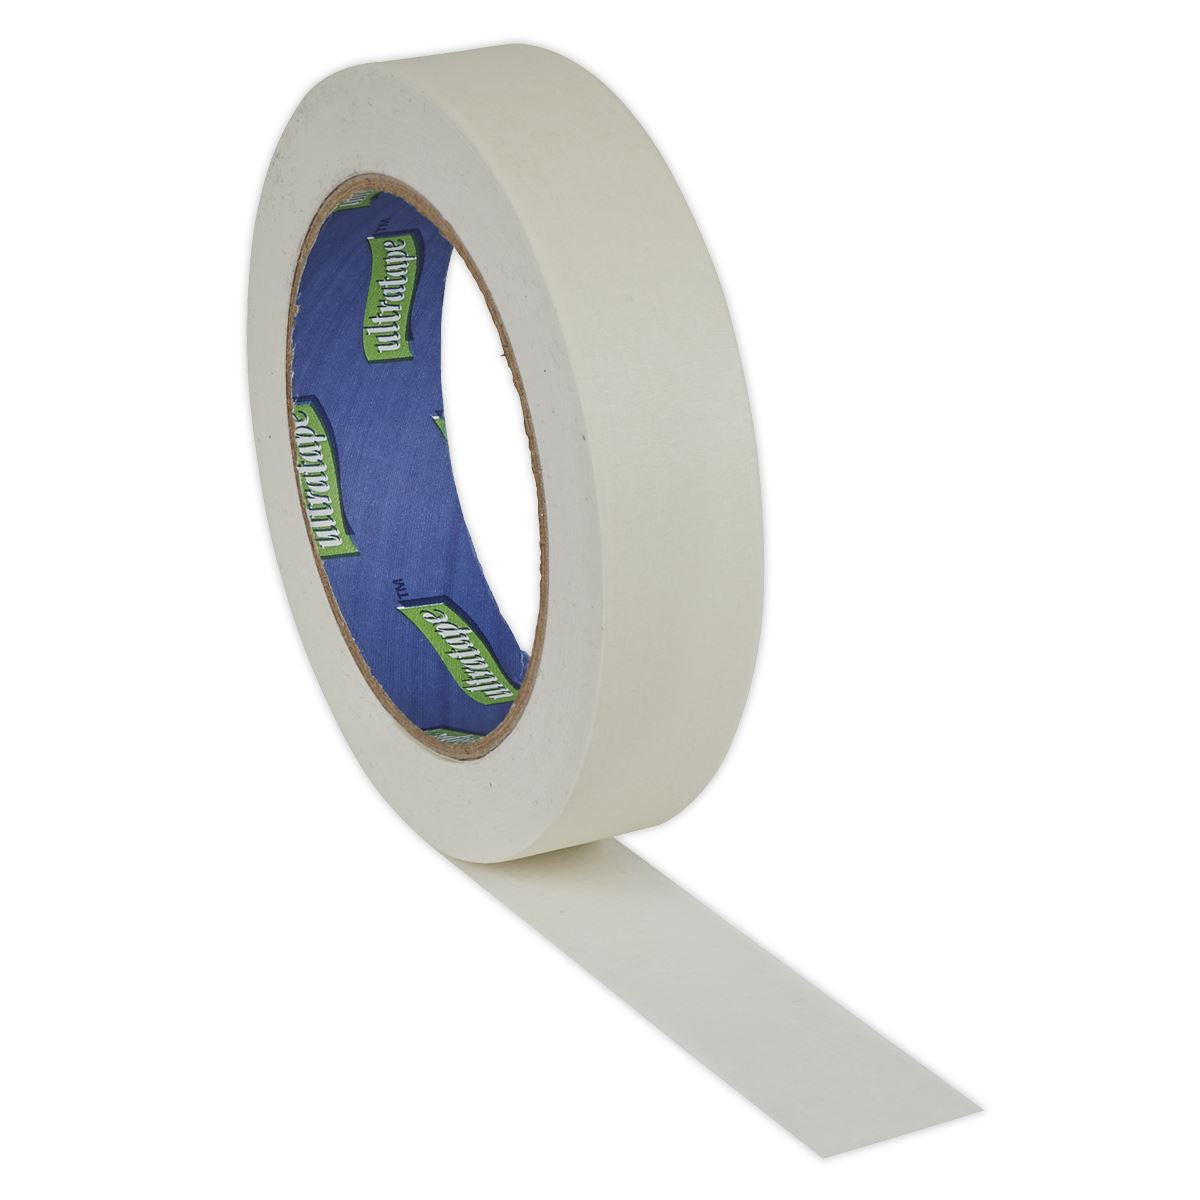 Clear double-sided sticky tape, specially for windows / glass 19mm x 1.5m